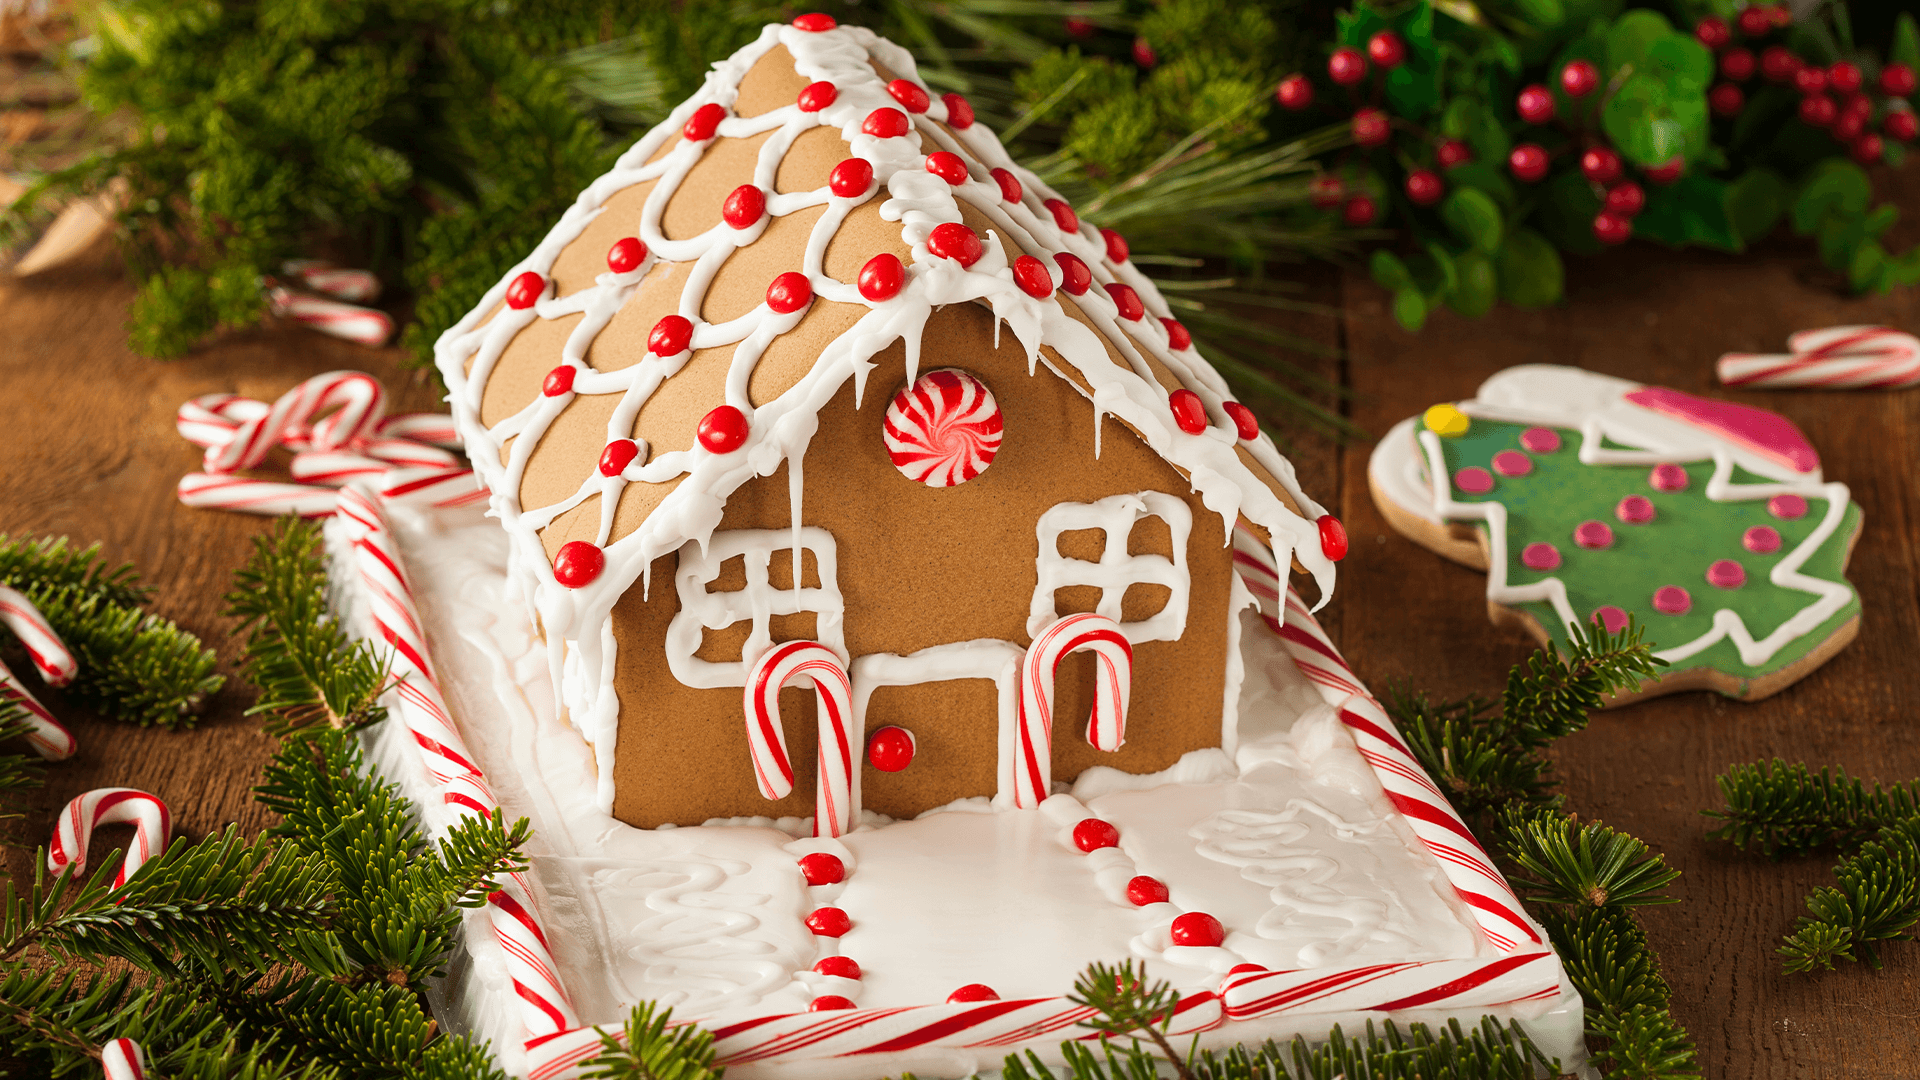 A Gingerbread house sits on a white board, doecorated with white white icing, with candy canes and red lollies on the roof. Christmas pine folliage and red berries sit around the table.